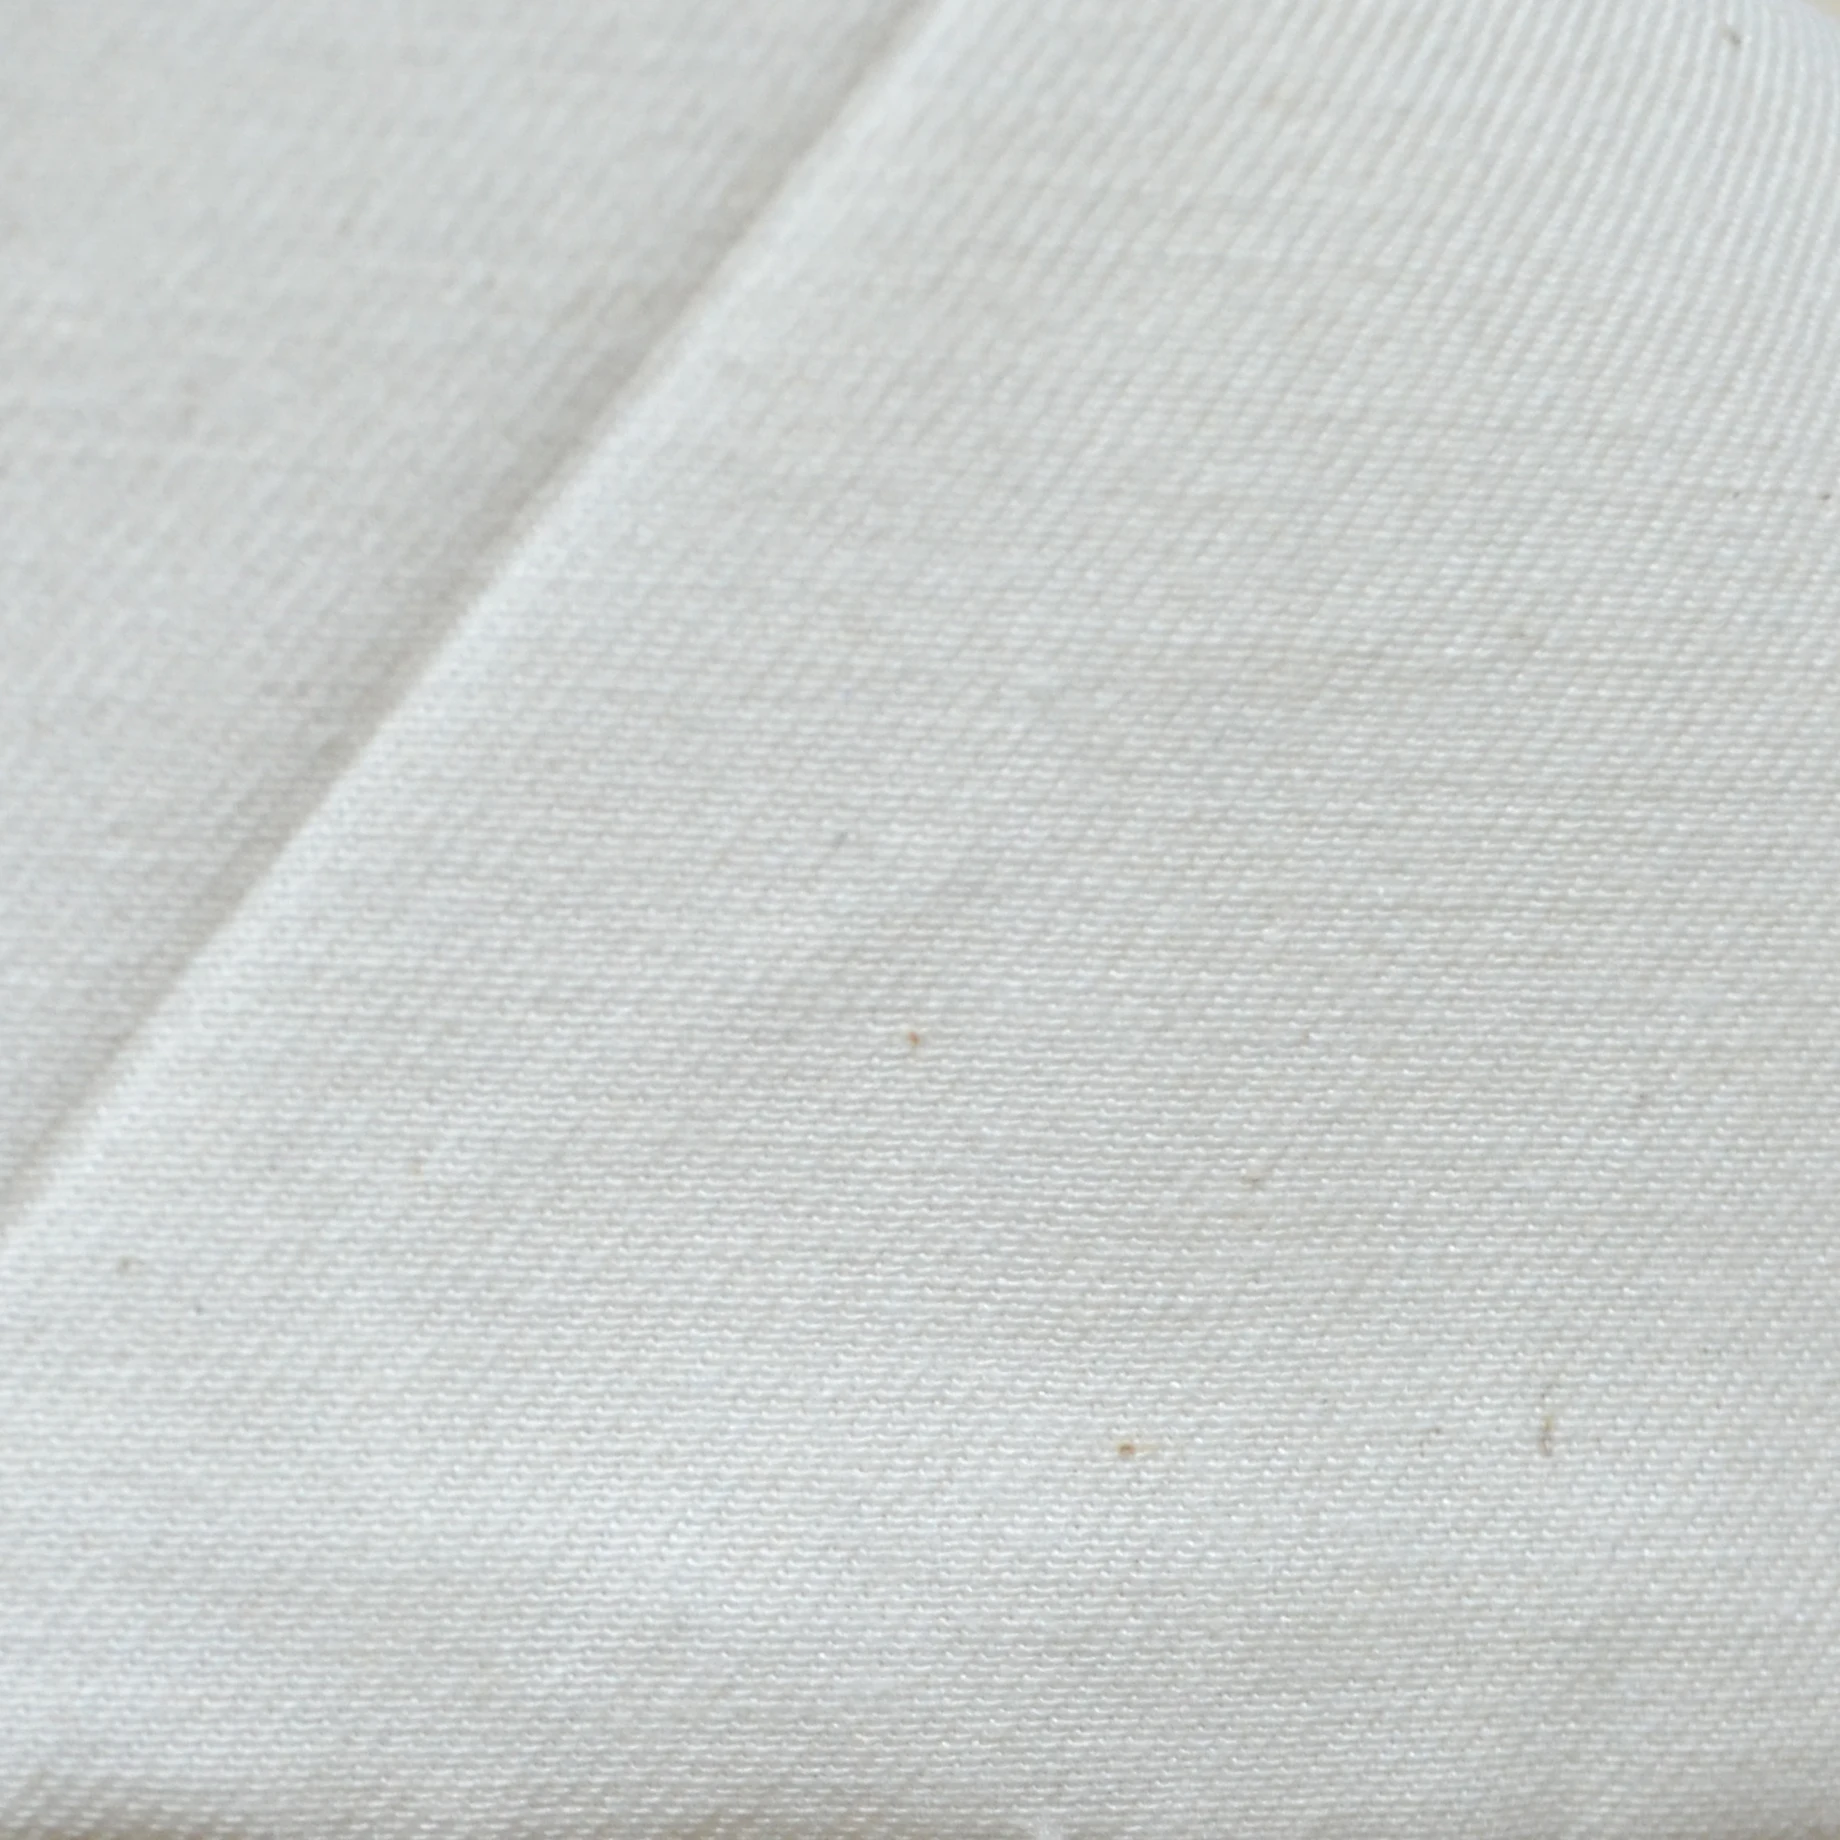 Tc poplin greige fabric combed quality workwear woven polyester 65% cotton 35% unbleached greige fabrics